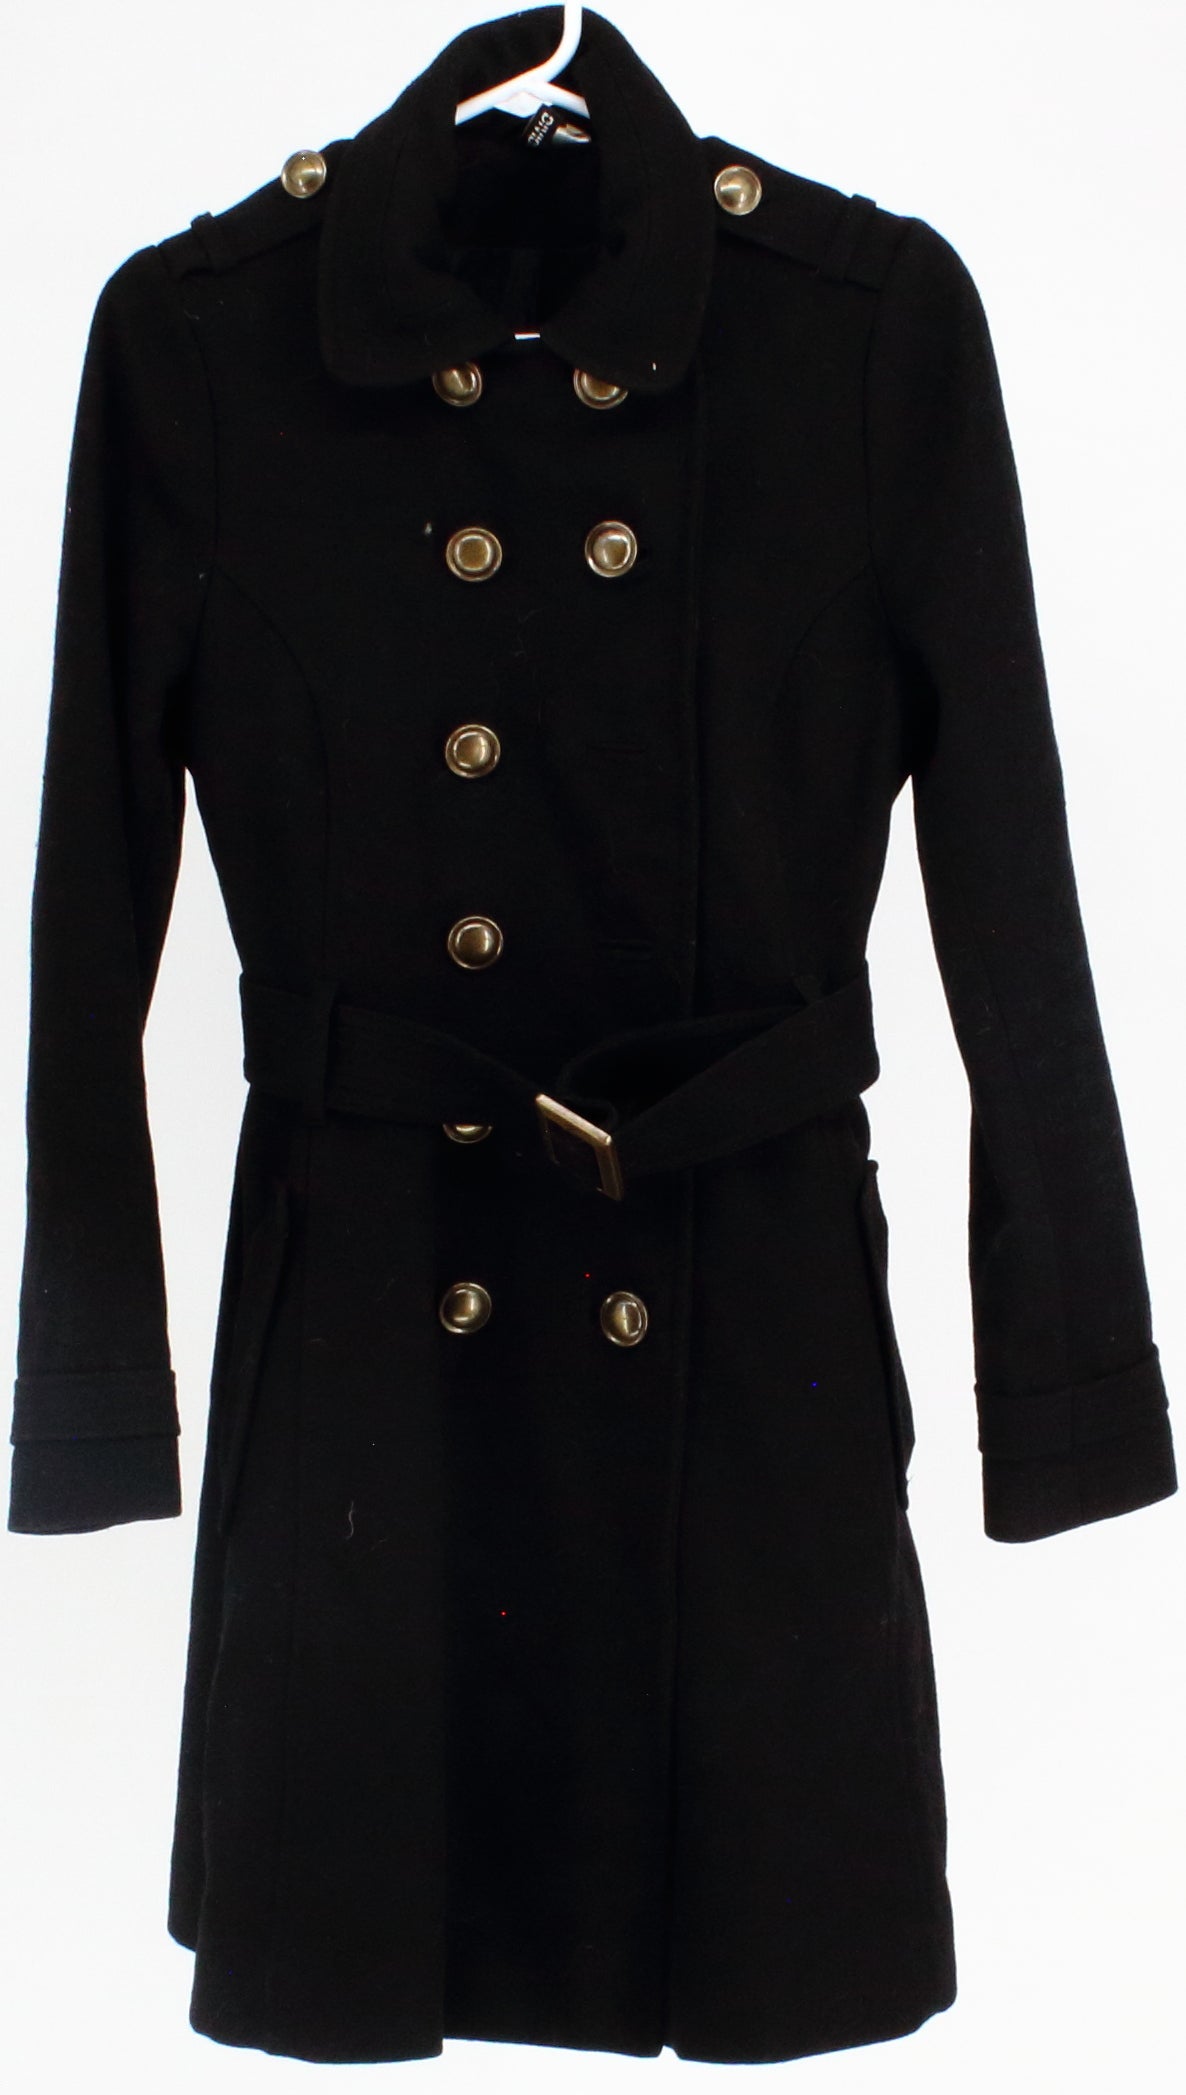 H&M Divided Black Women's Wool Coat With Belt and Gold Buttons